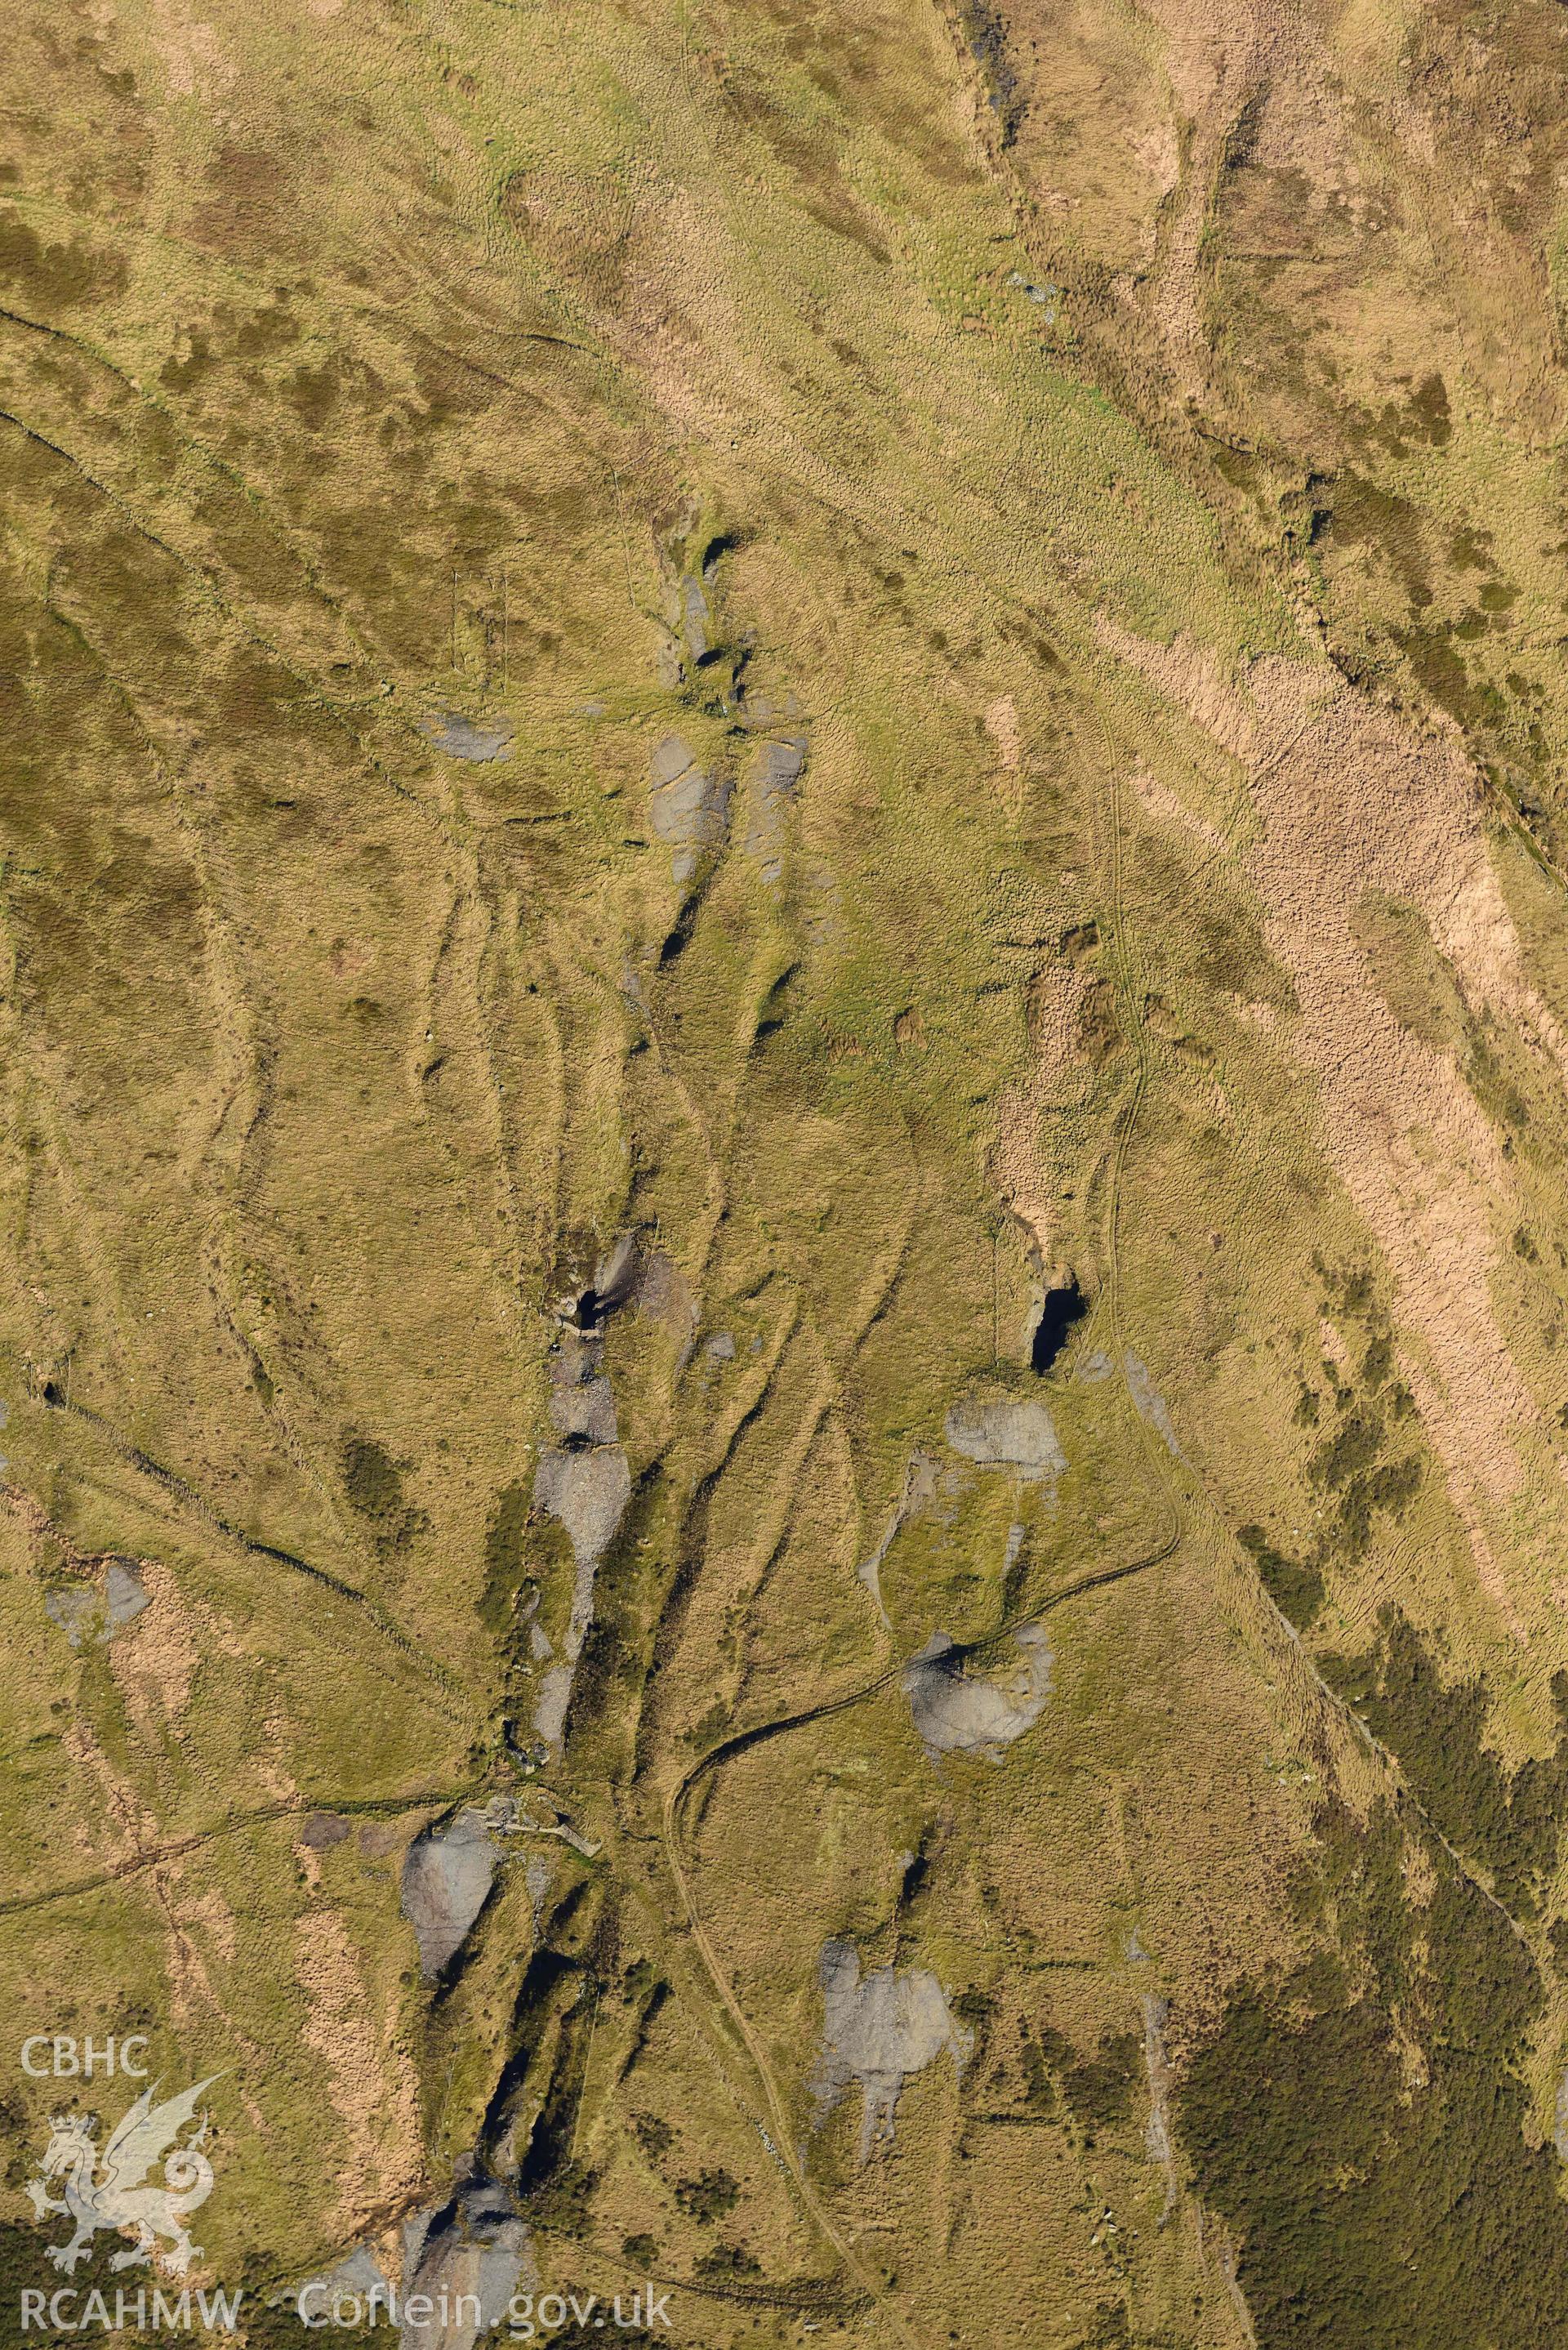 Oblique aerial photograph of Copa Hill taken during the Royal Commission’s programme of archaeological aerial reconnaissance by Toby Driver on 17th January 2022